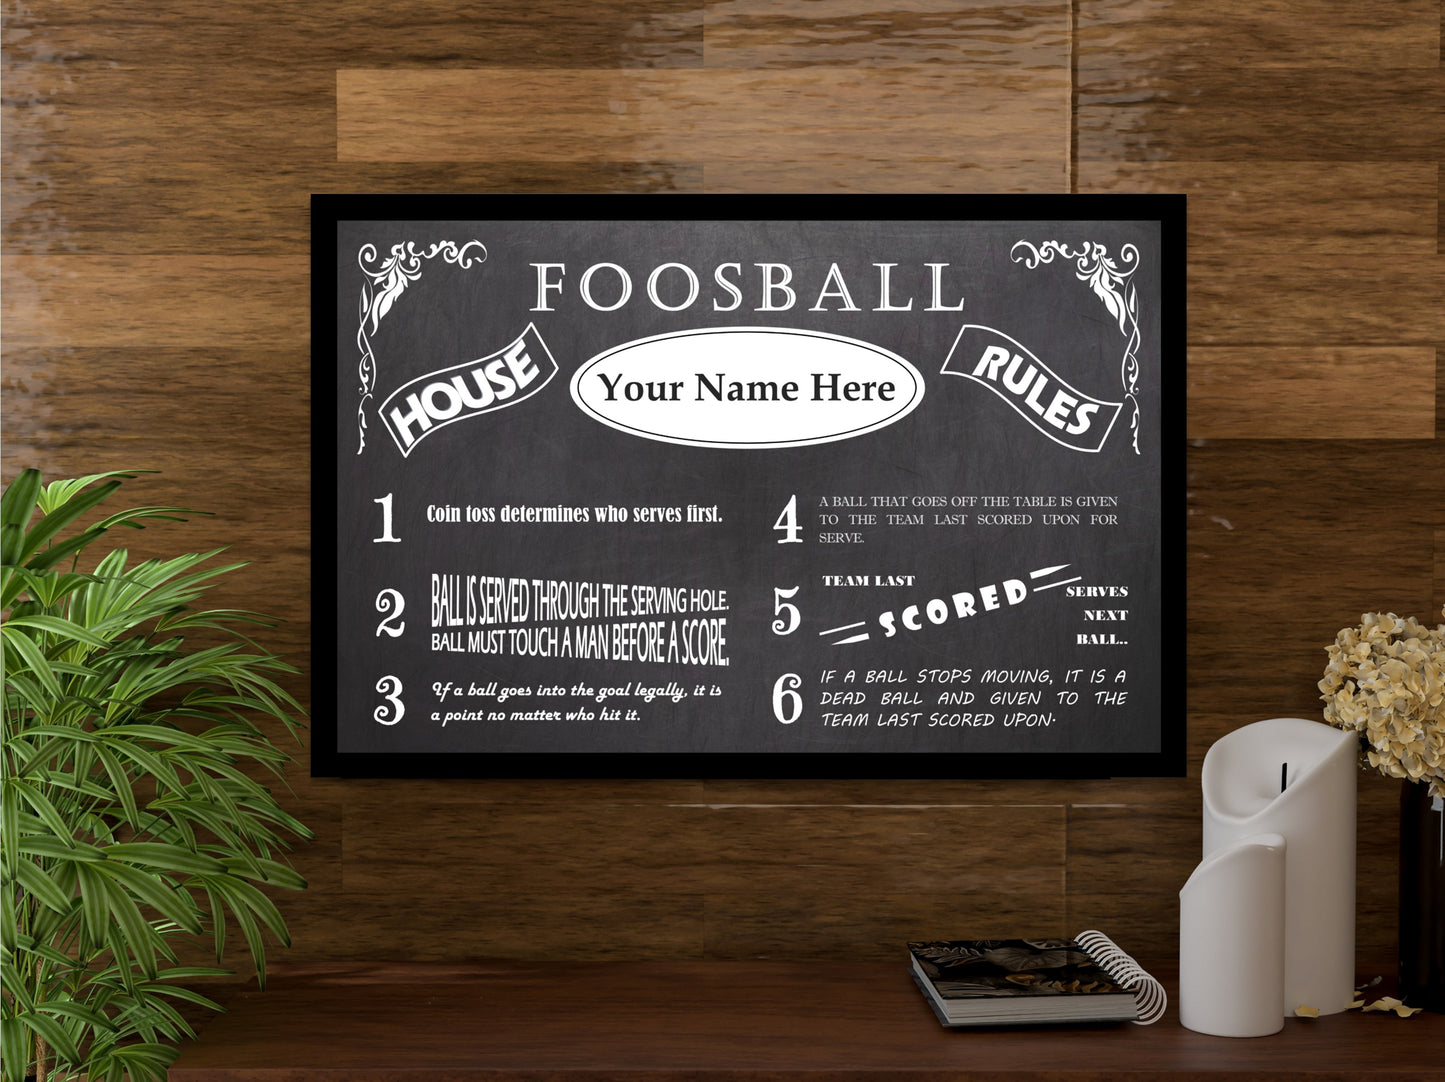 Vintage Foosball Personalized House Rules Poster Customized With Your Name!